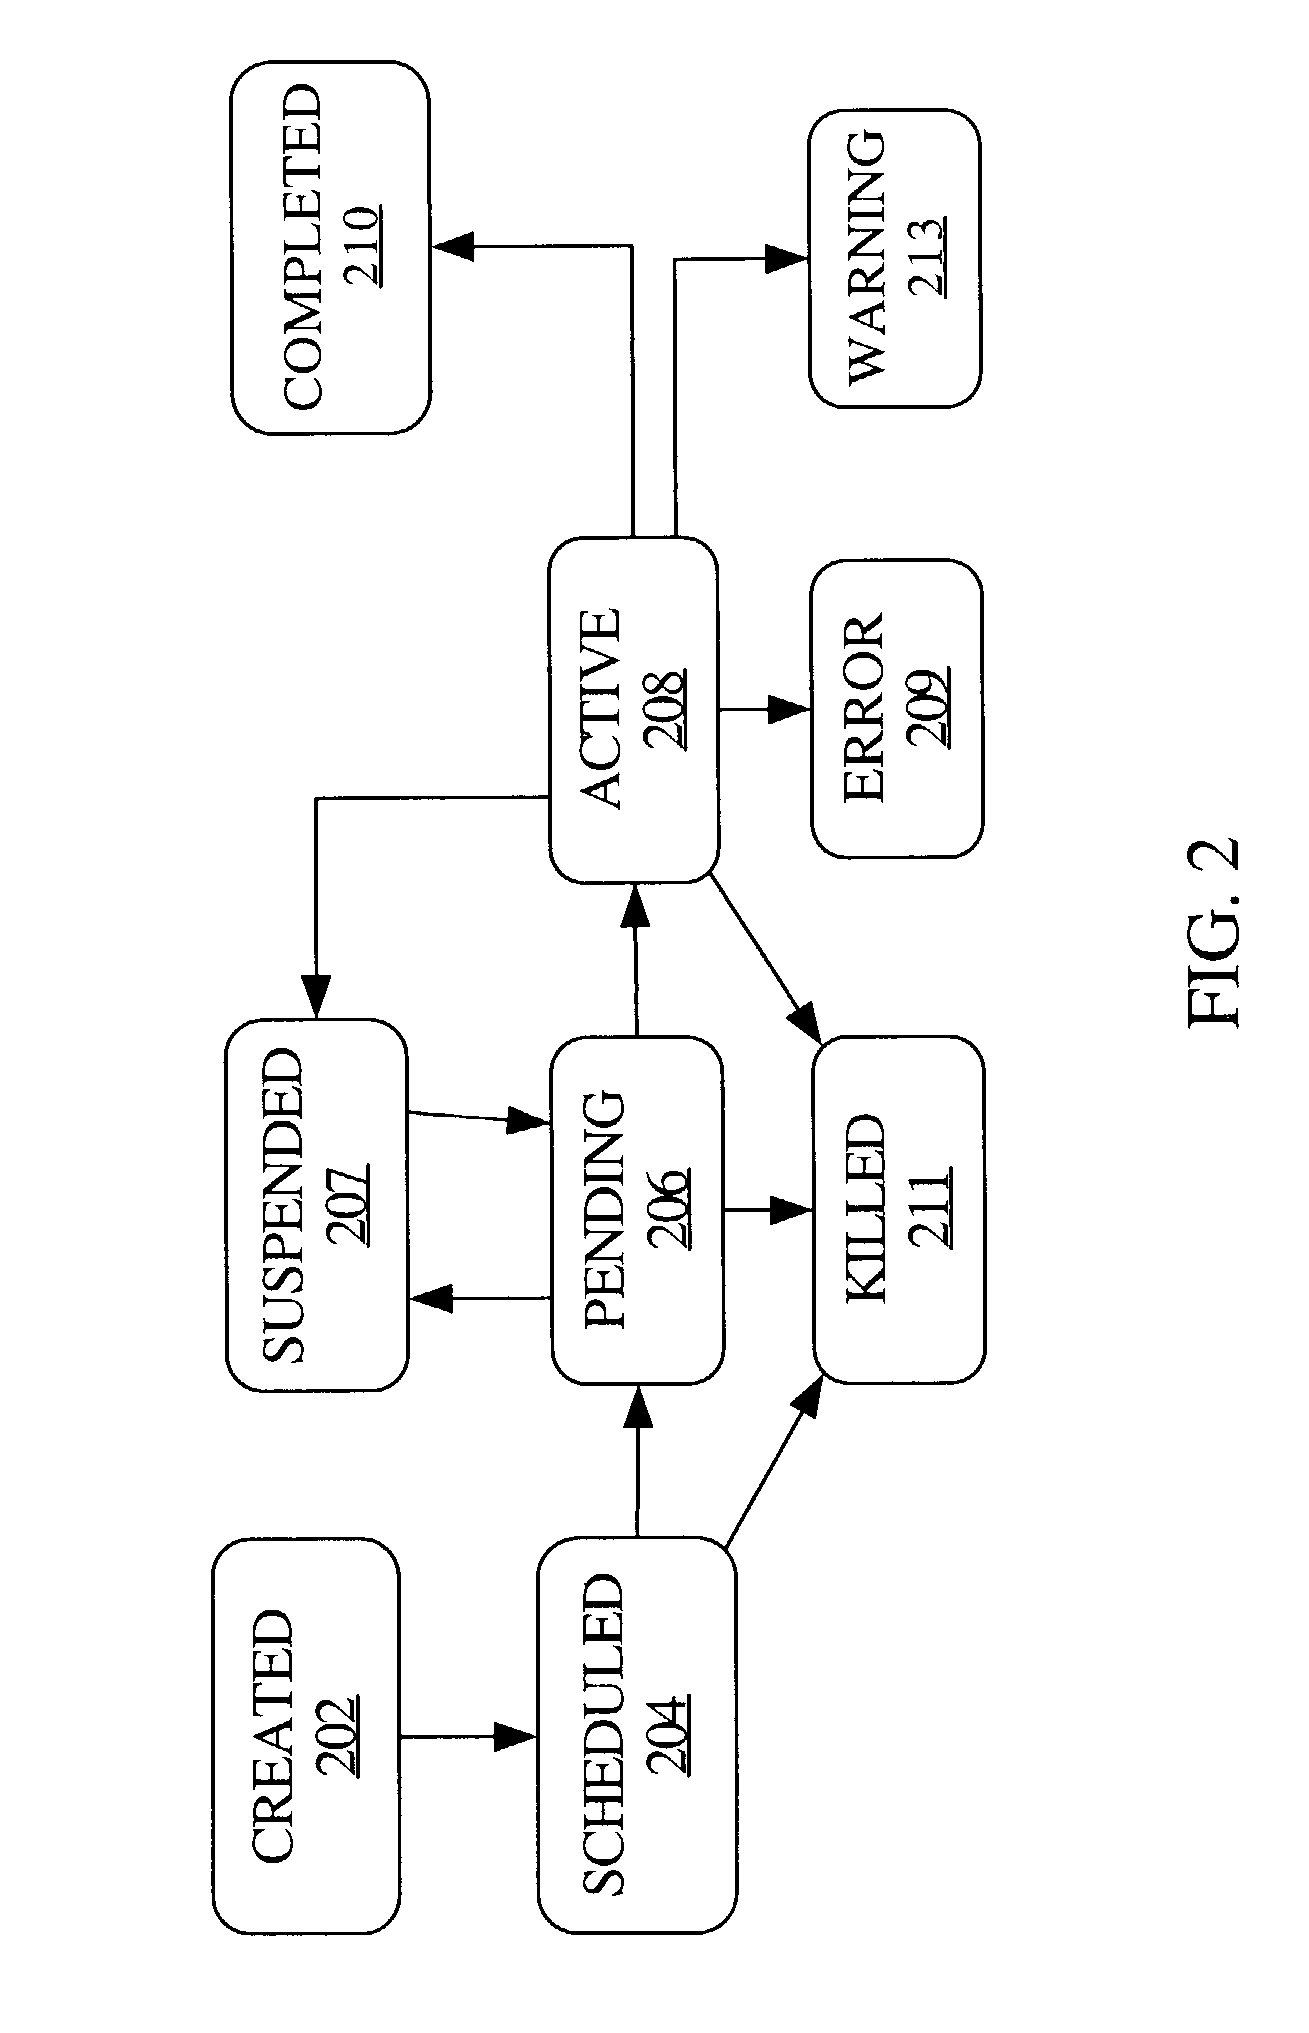 Mechanism for managing parallel execution of processes in a distributed computing environment